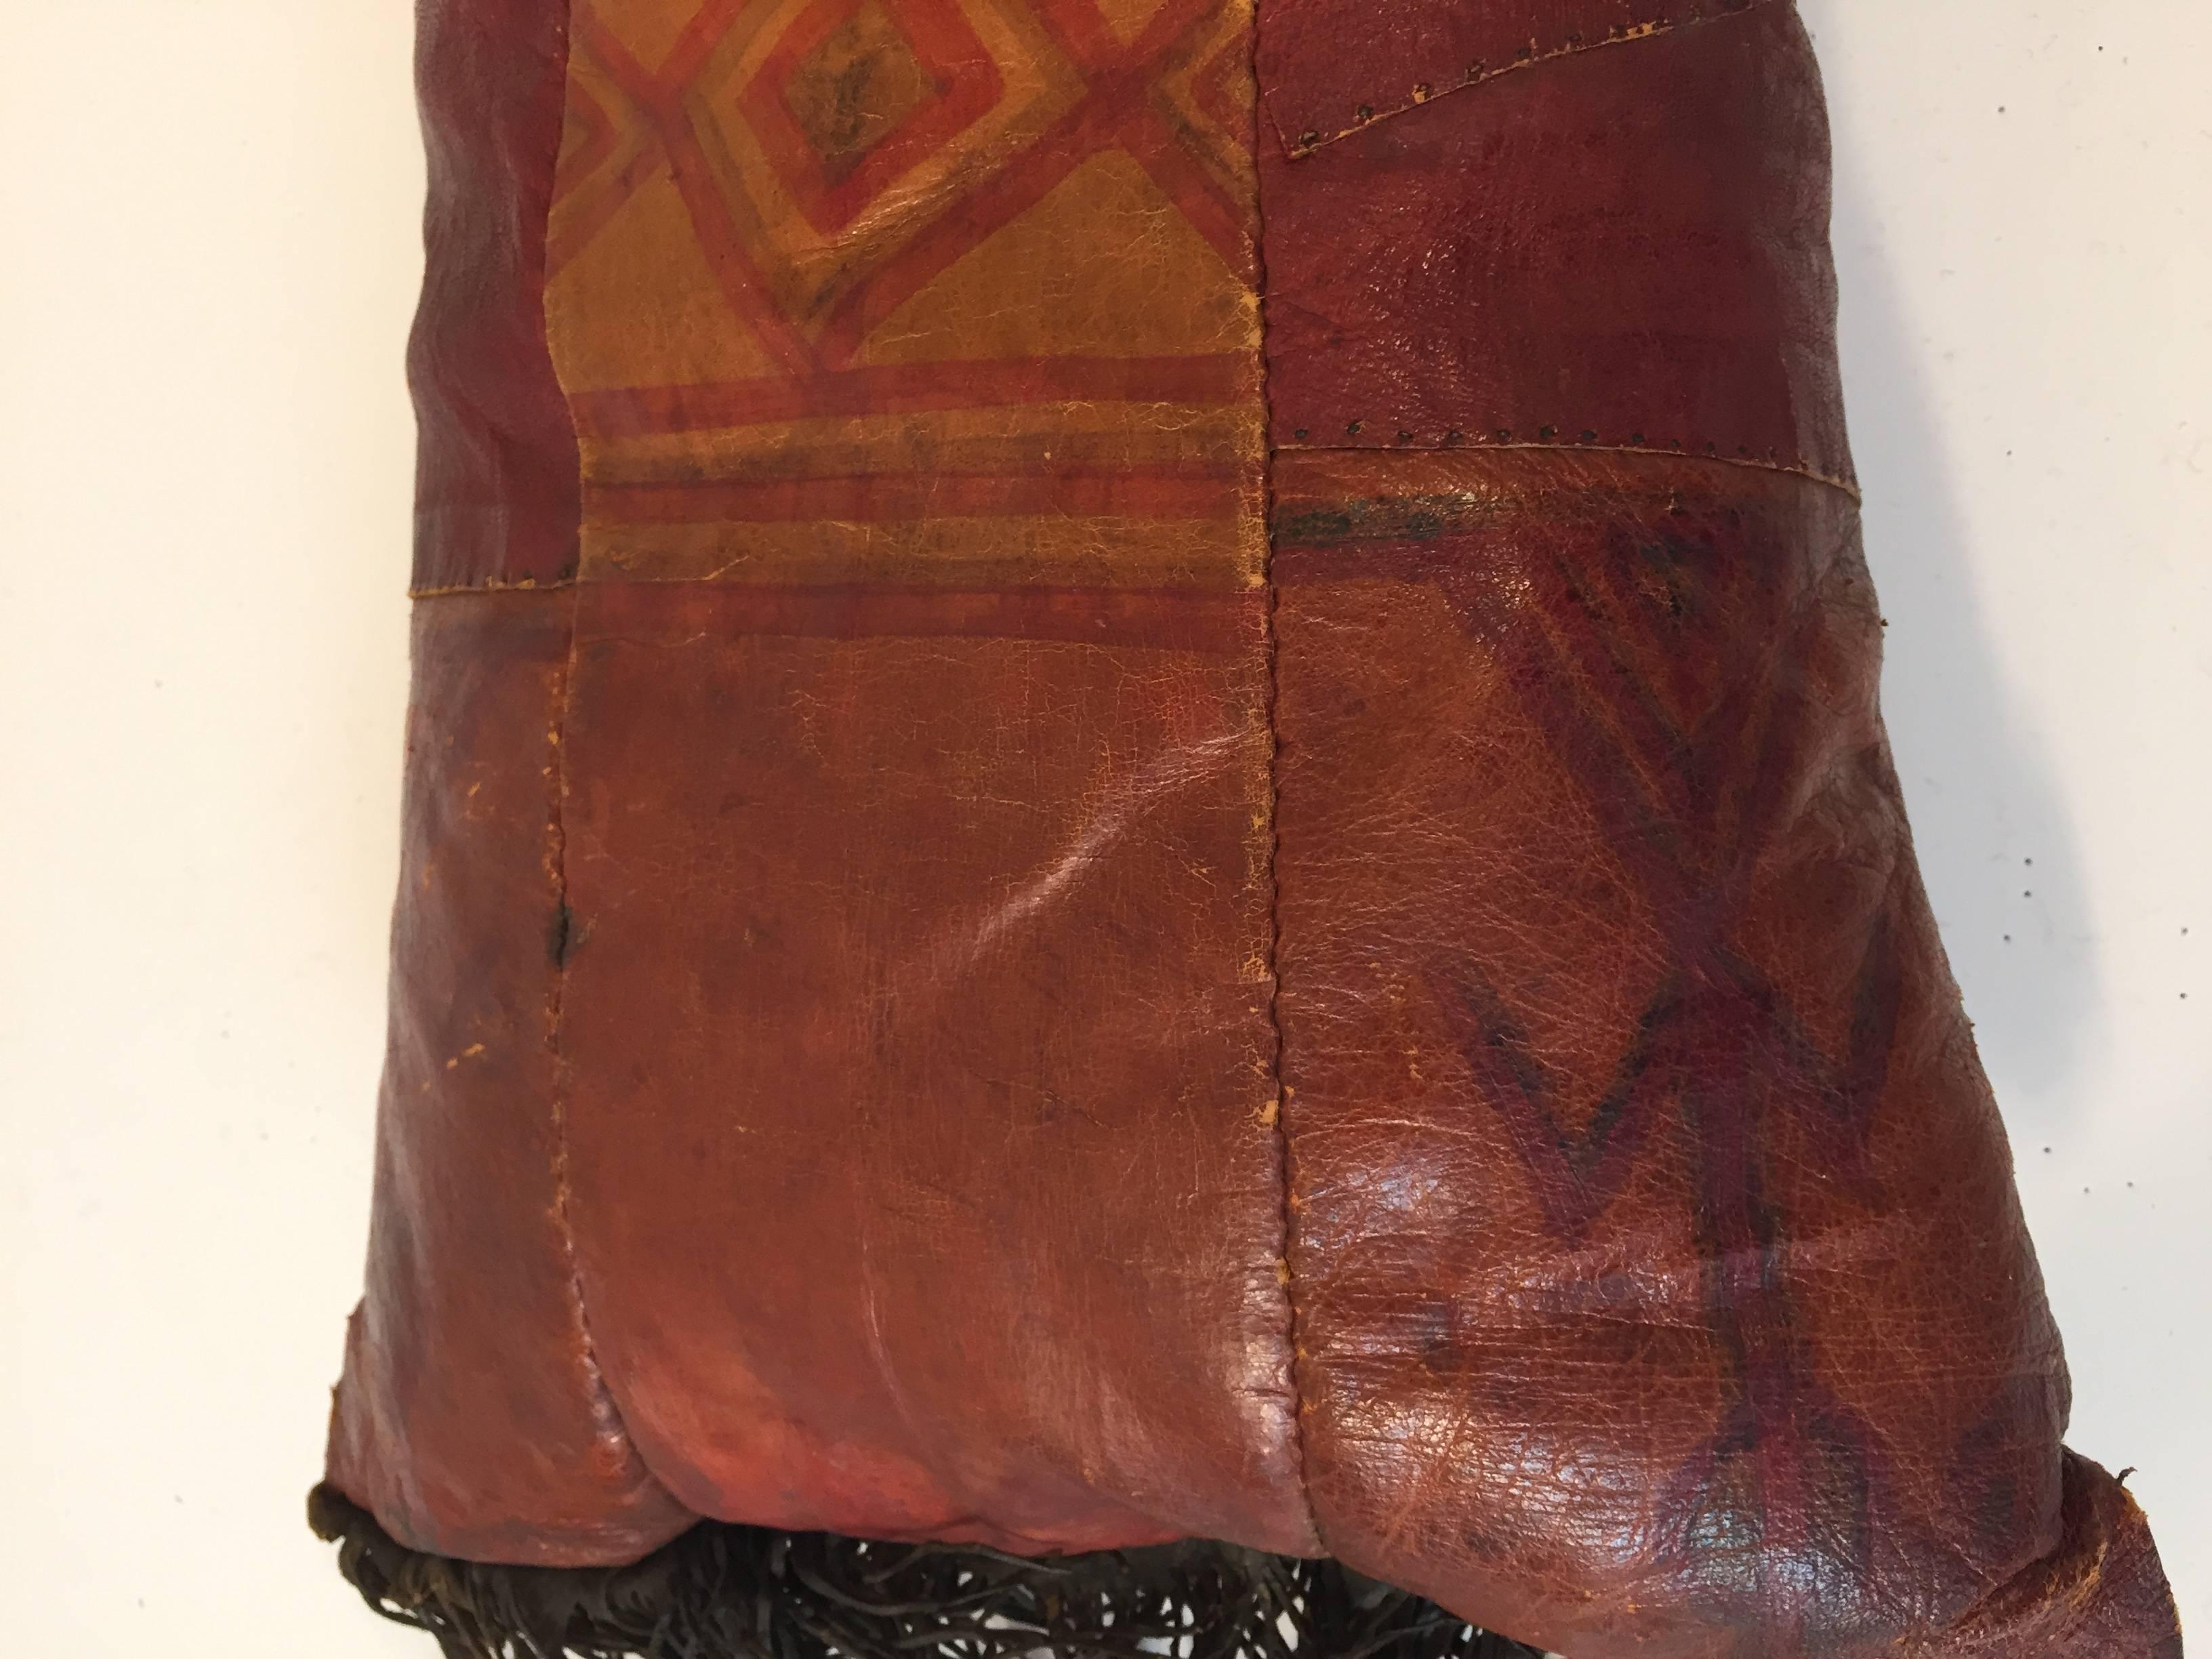 African Tuareg hand tooled leather pillow.
Great colors, hand-painted with tribal geometric design with long leather fringes on each side.
Handcrafted in Africa with pieces of leather sewn together and hand-painted, the back has a different